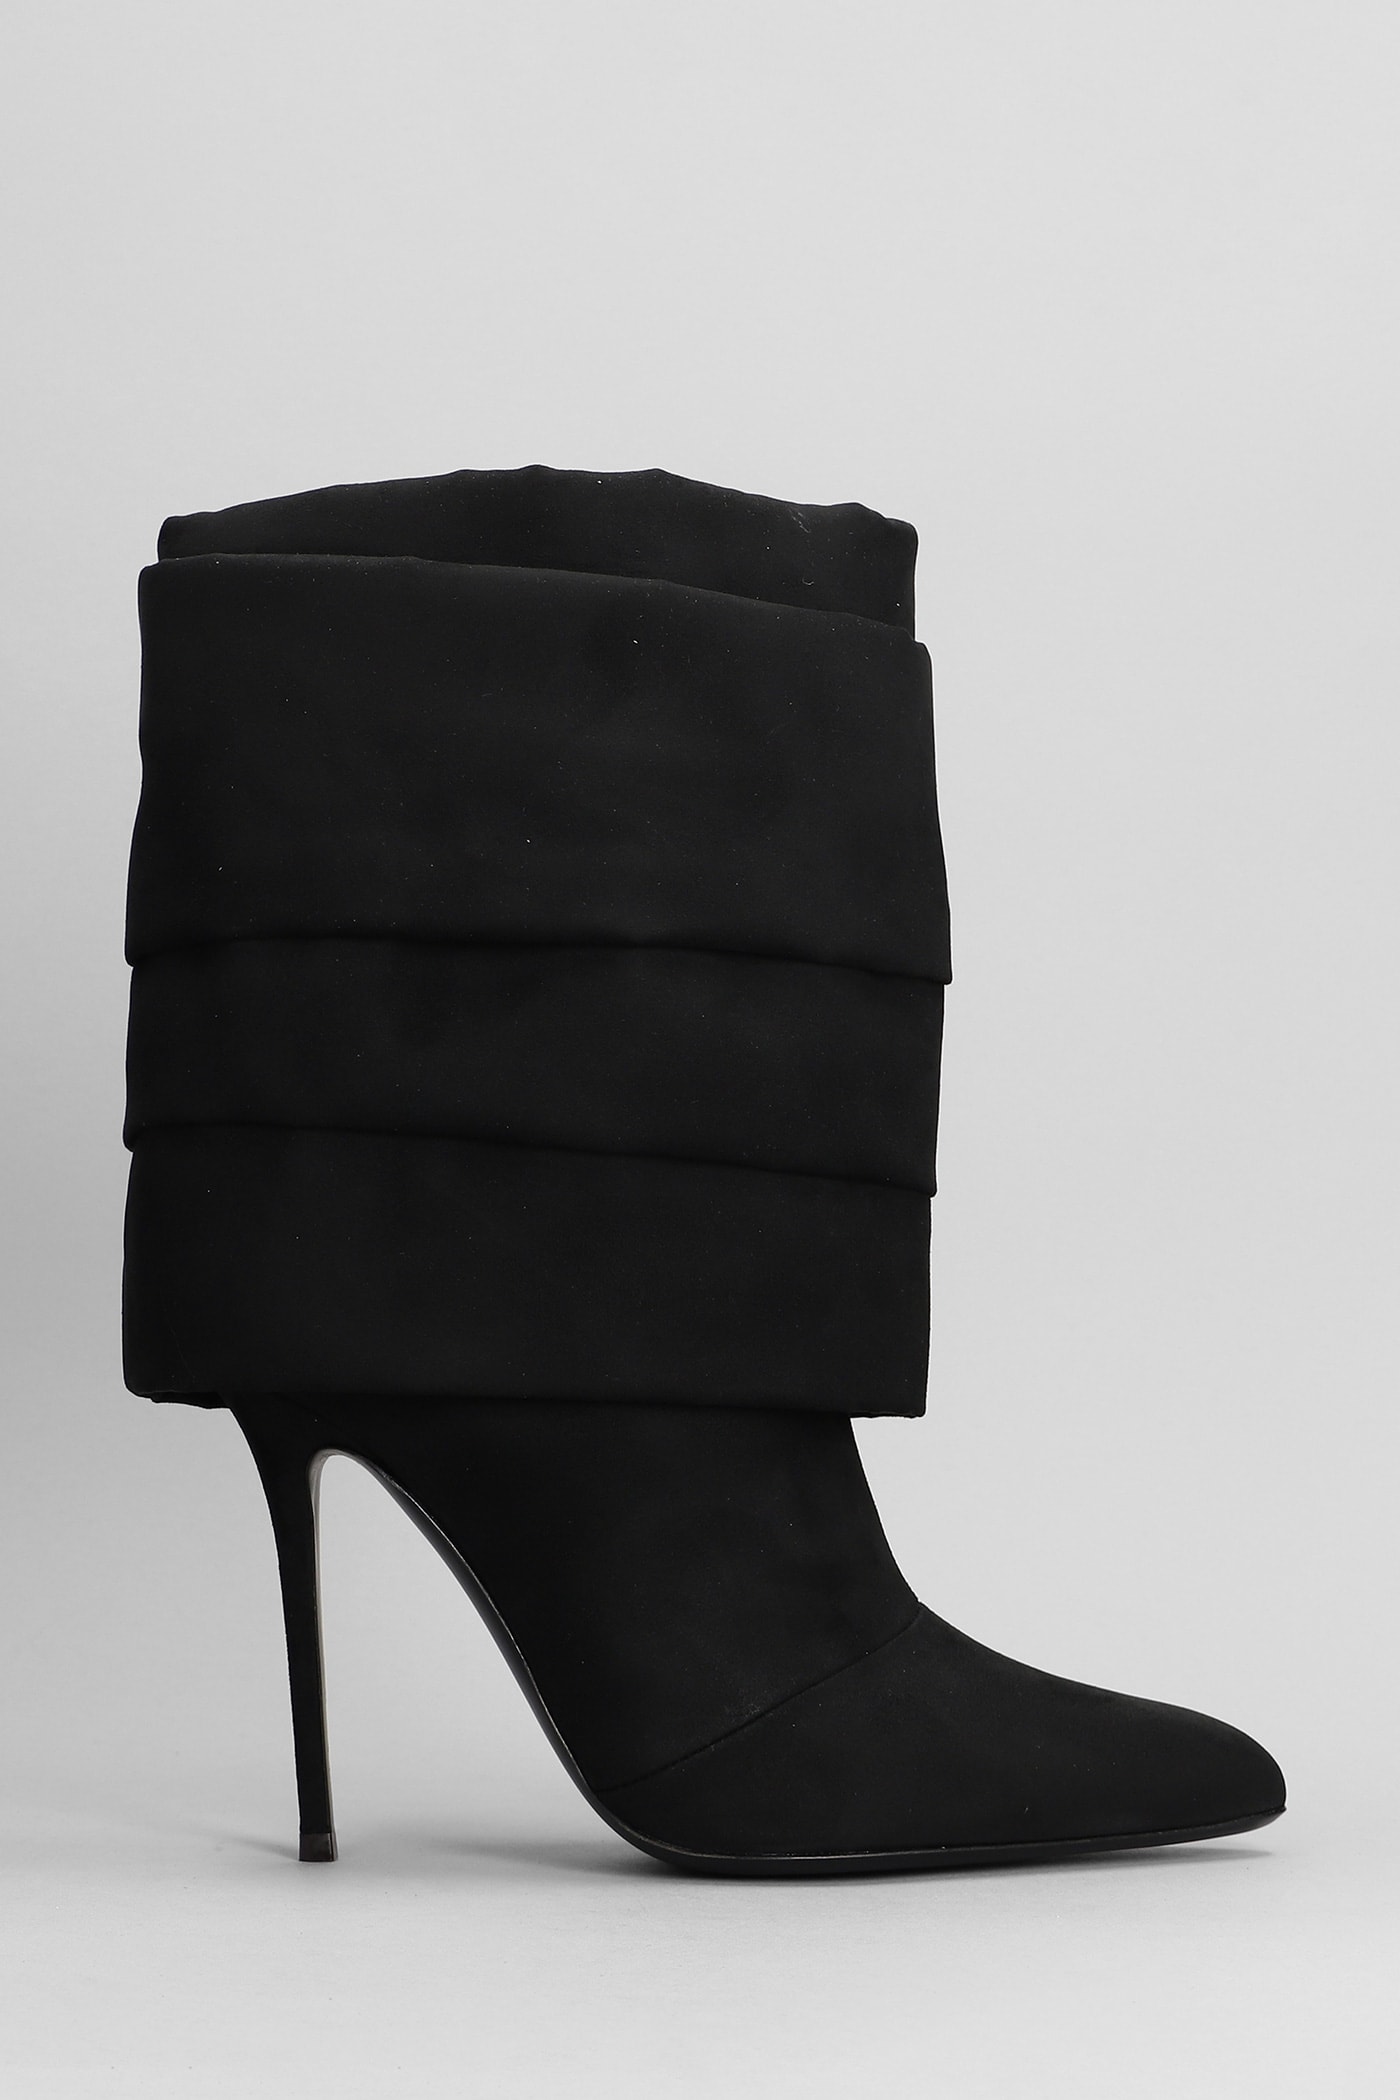 Giuseppe Zanotti High Heels Ankle Boots In Black Suede